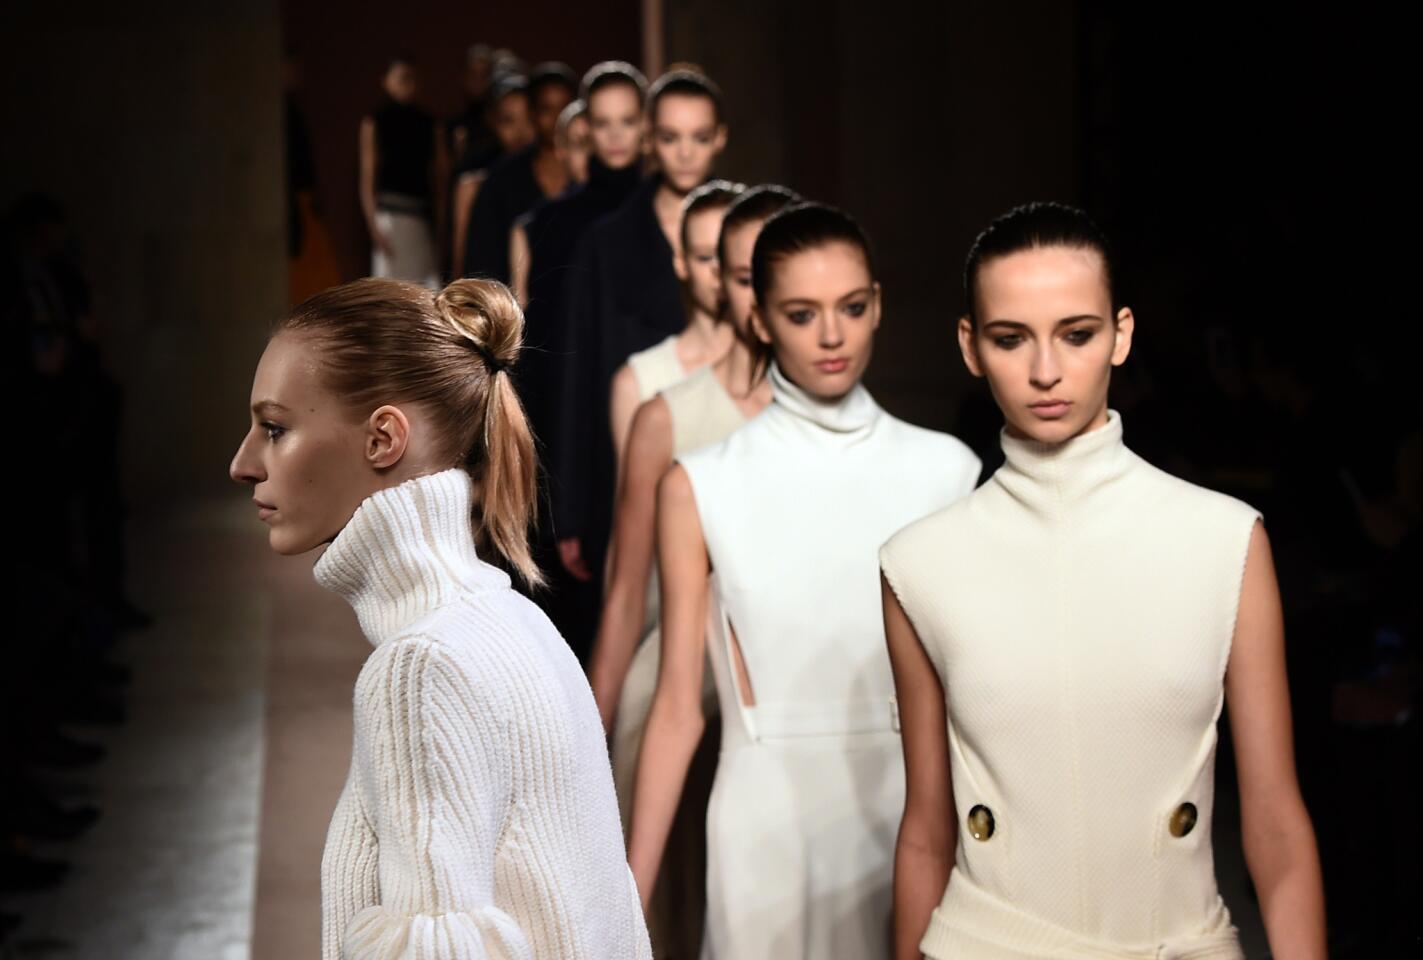 Models present creations by designer Victoria Beckham during the Mercedes-Benz Fashion Week Fall 2015 in New York on Feb. 15, 2015.